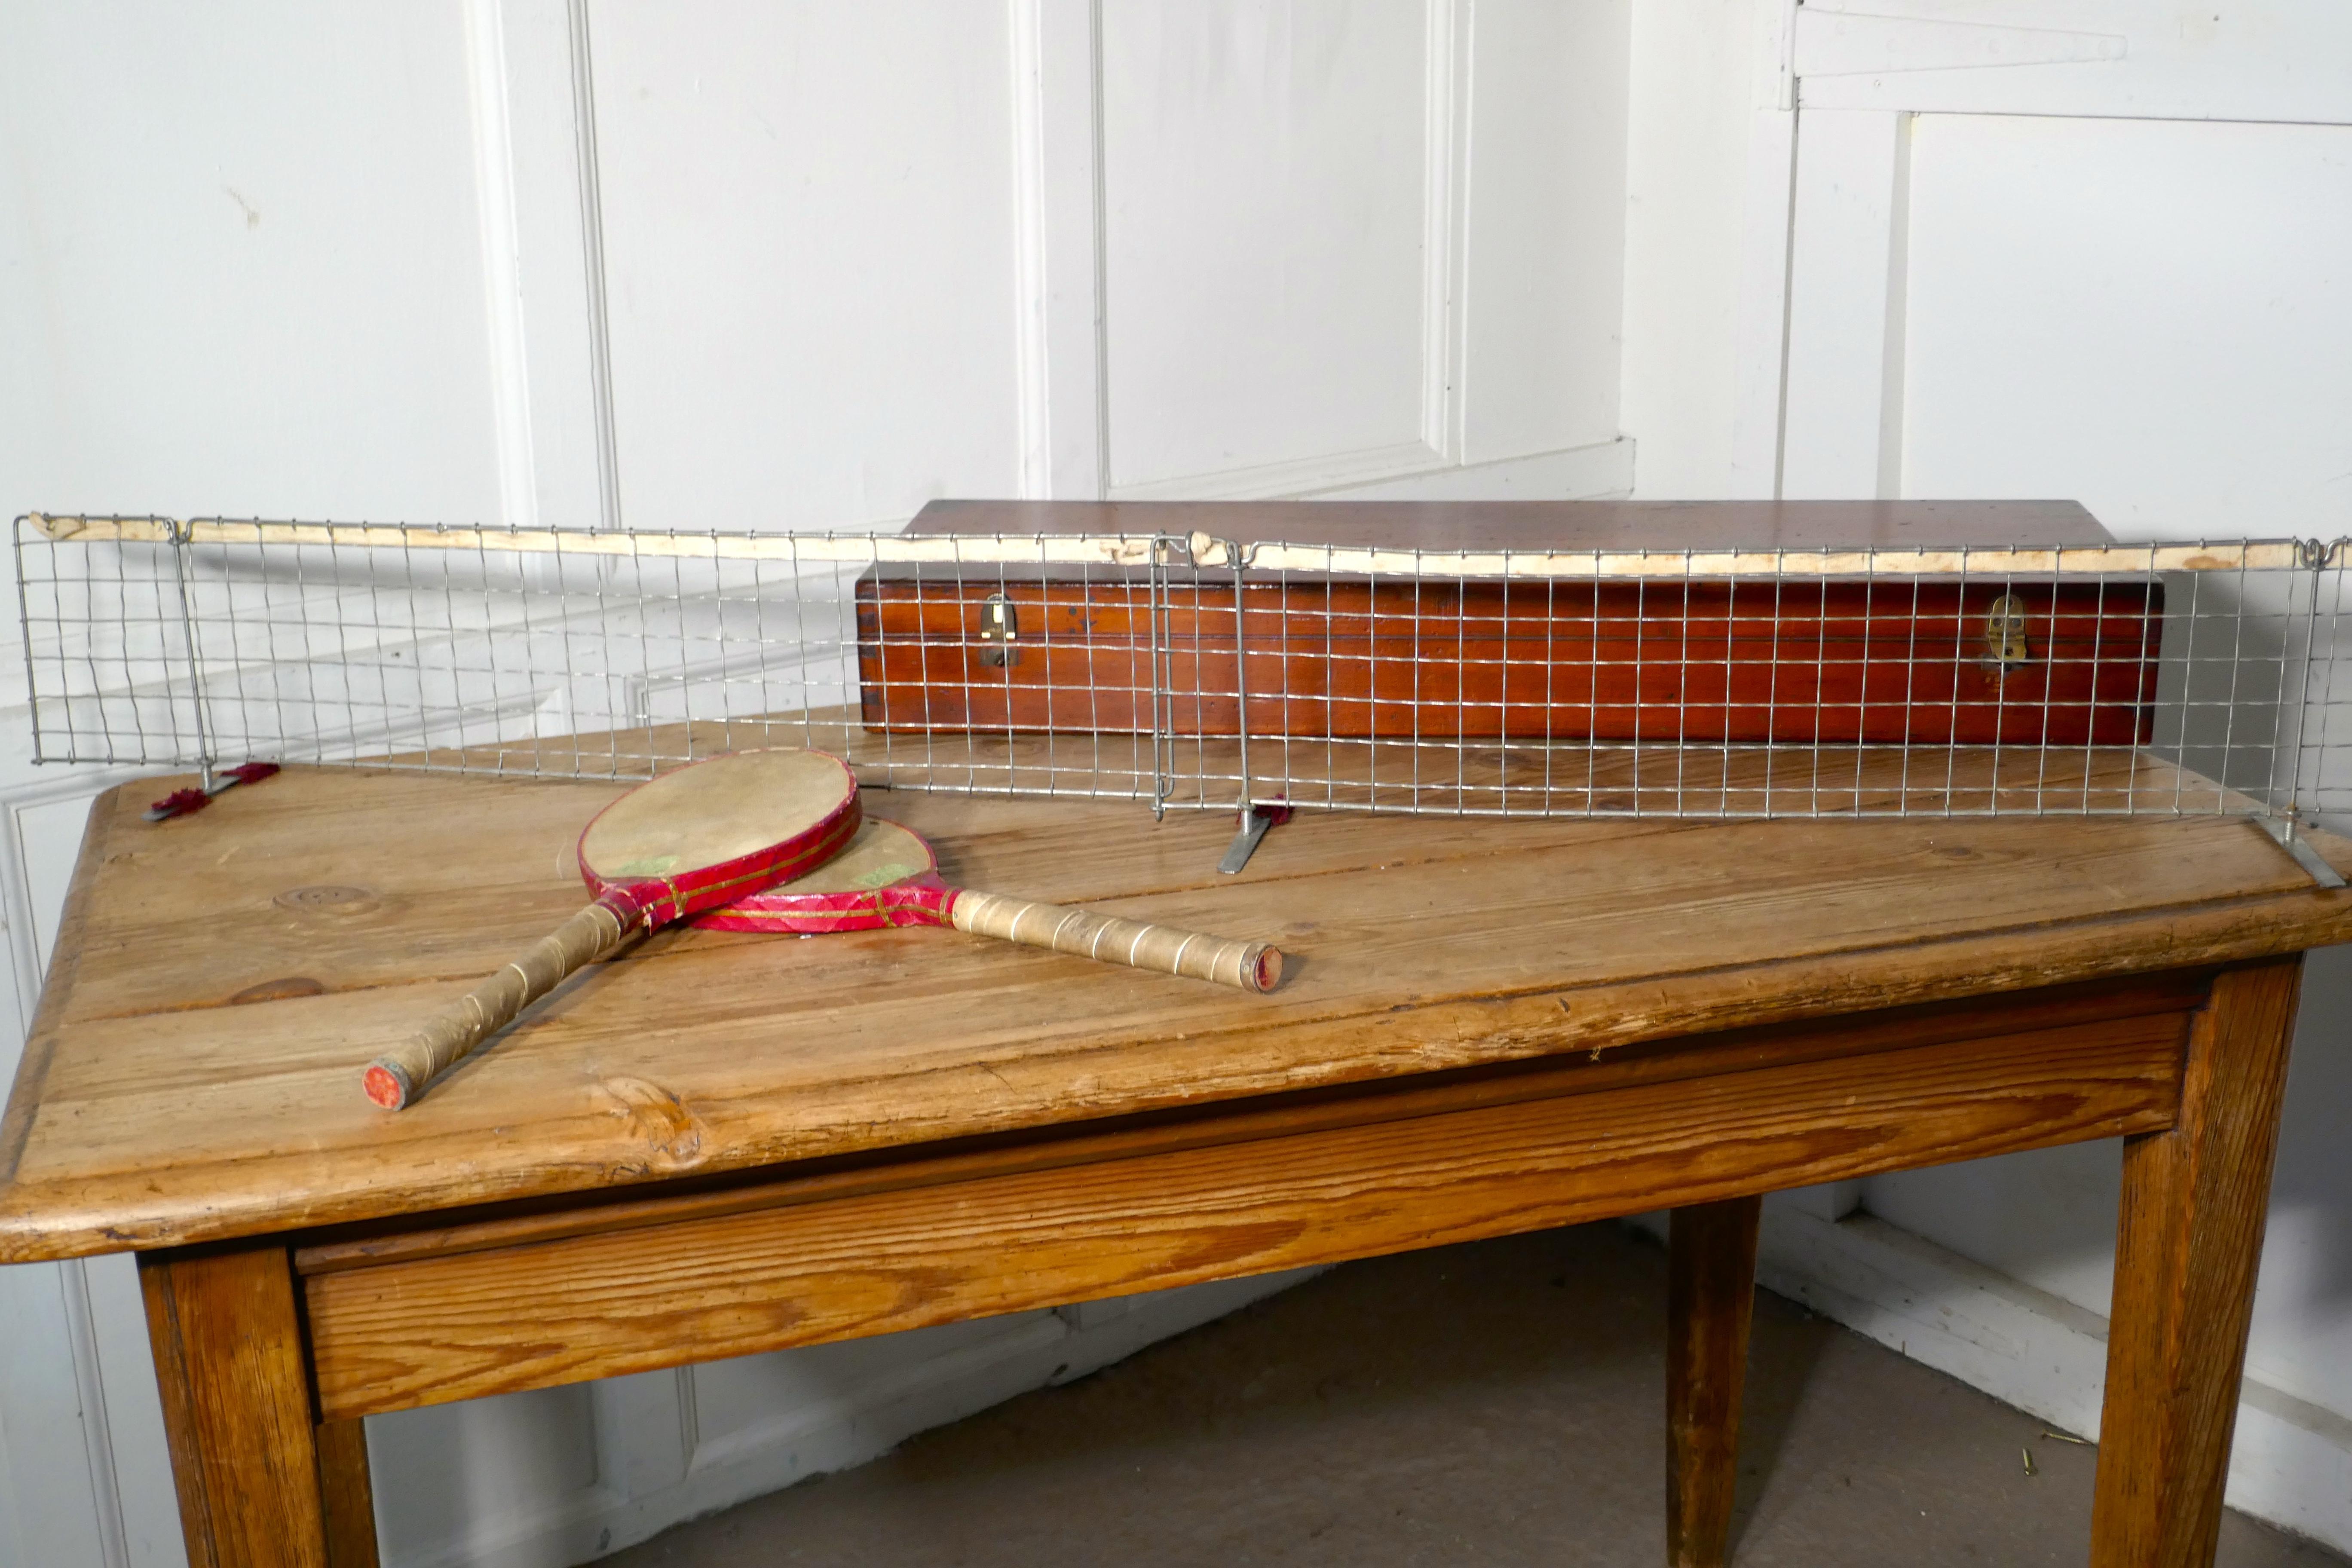 Vintage Edwardian ping pong or table tennis set by Quiggins

A great set, comprising 2 bats wire net (comes in 2 pieces) and solid pine base lined box

Use bur usable condition requires new Ping pong Balls
The box is 4” high, 29” long and 9”